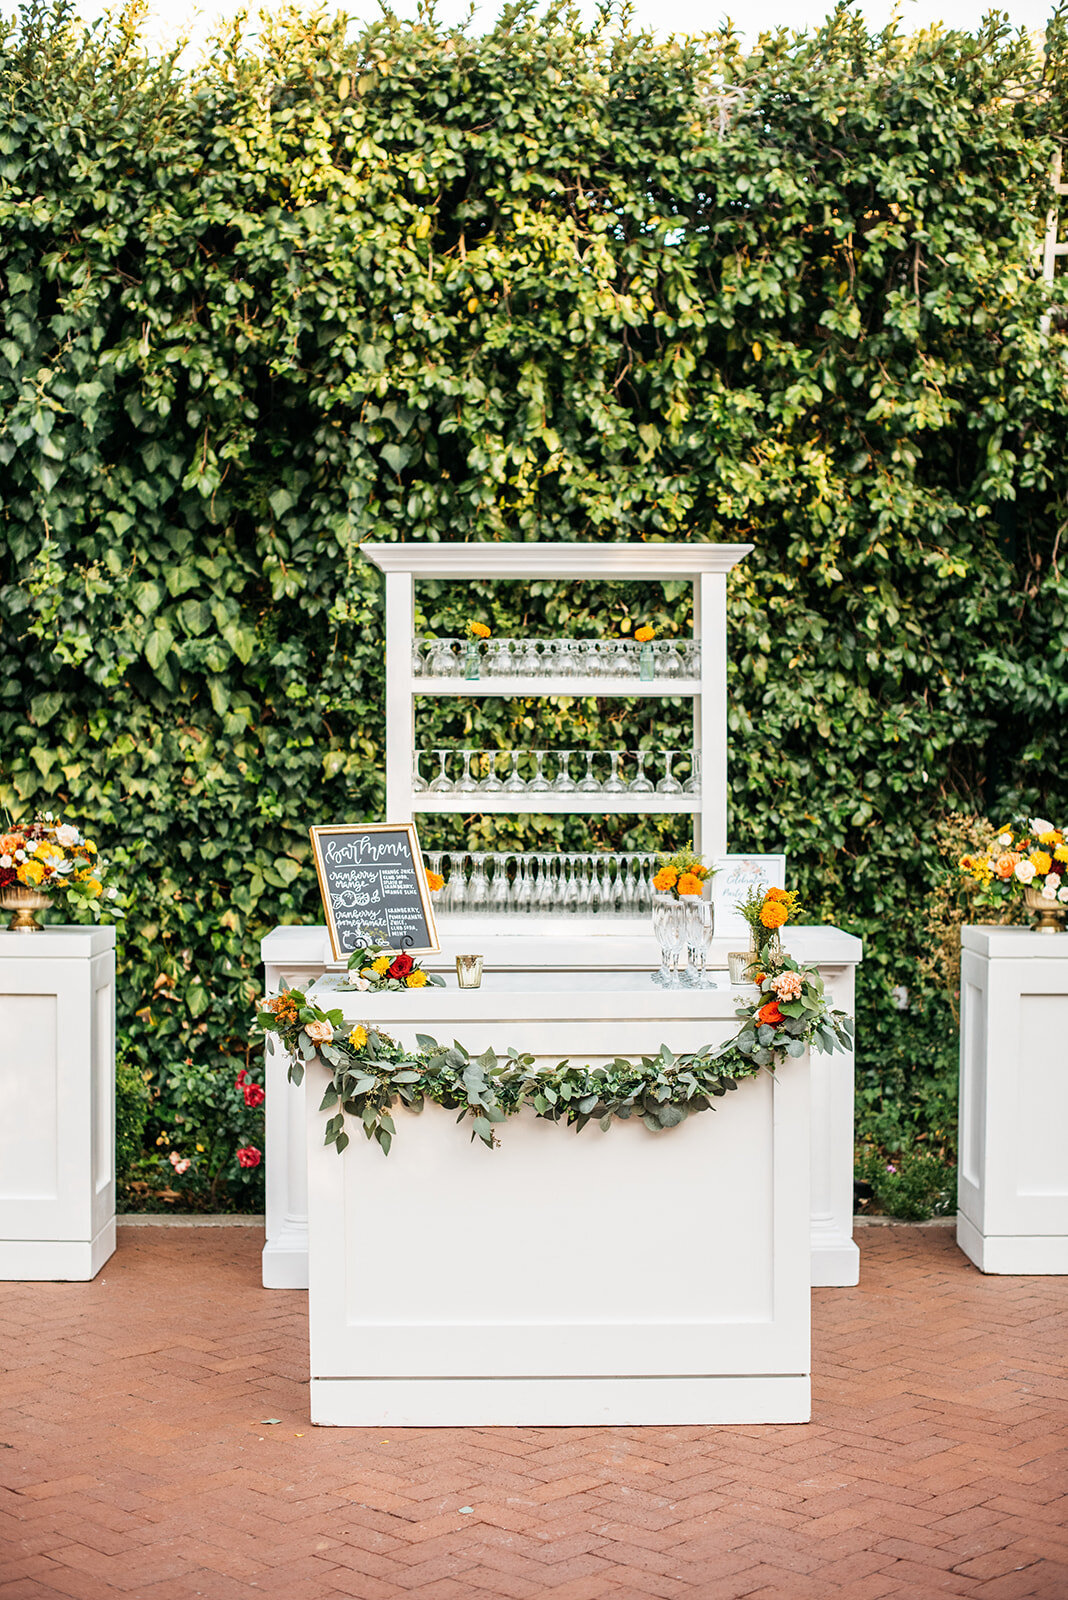 This elegant white bar display is the perfect addition to the cascading ivy wall in the Gardens Courtyard.